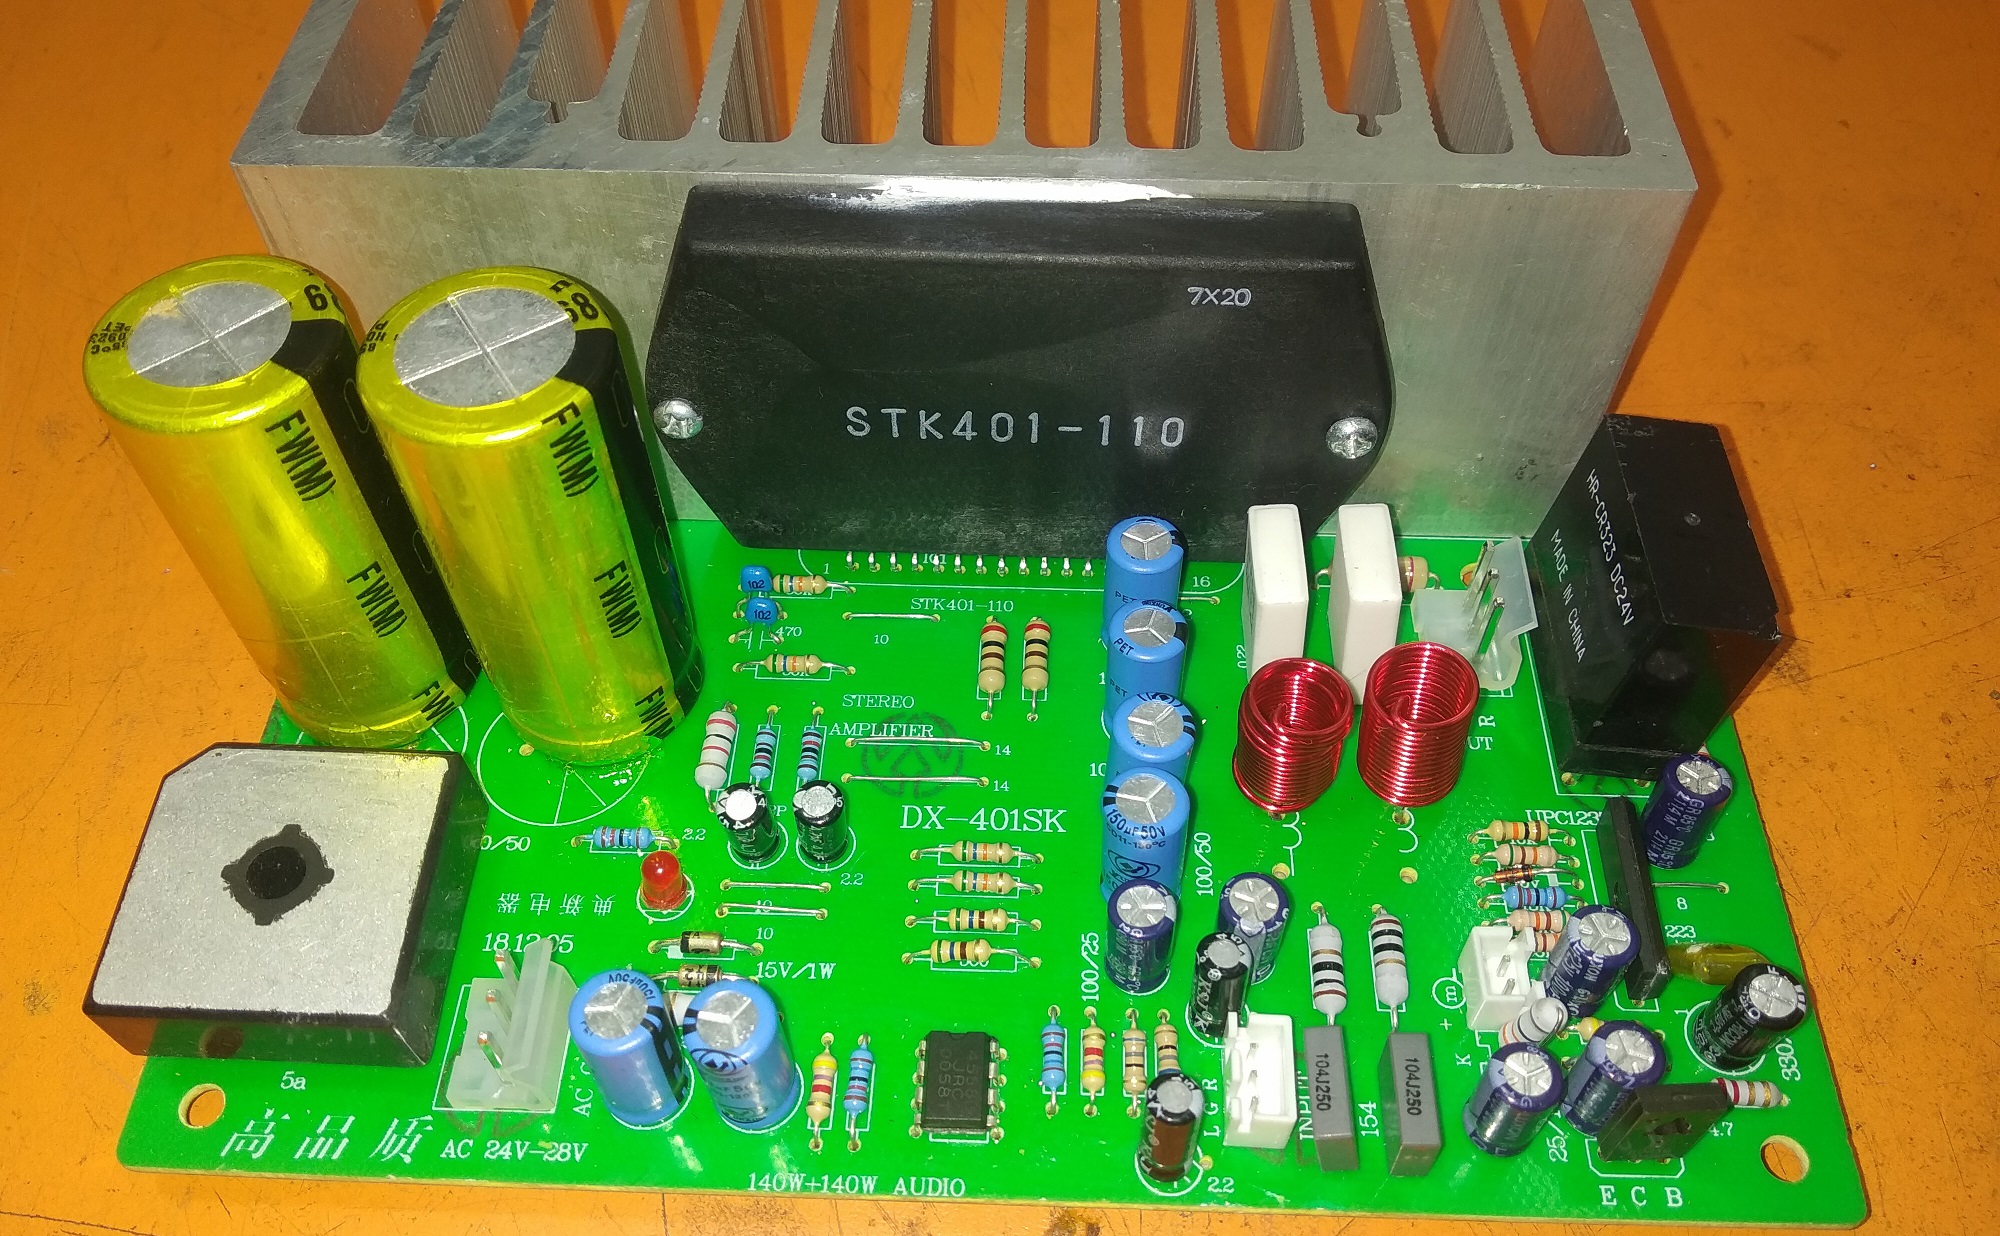 how to make amplifier using stk401-110